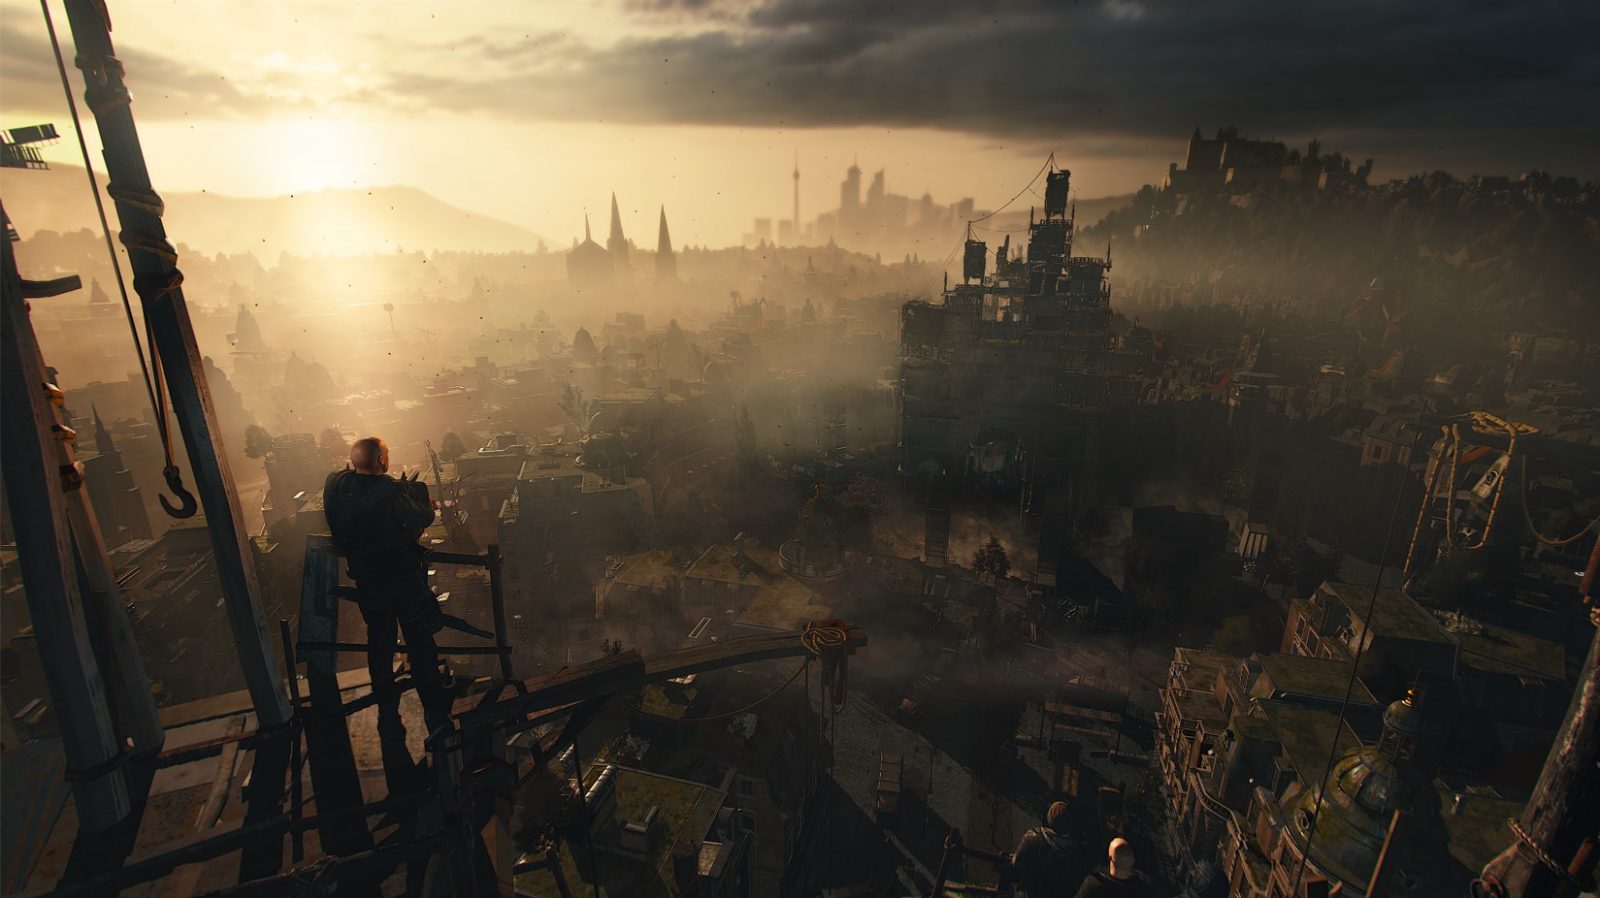 Dying Light 2: Stay Human' Is Half The Size On PS5 Versus PS4